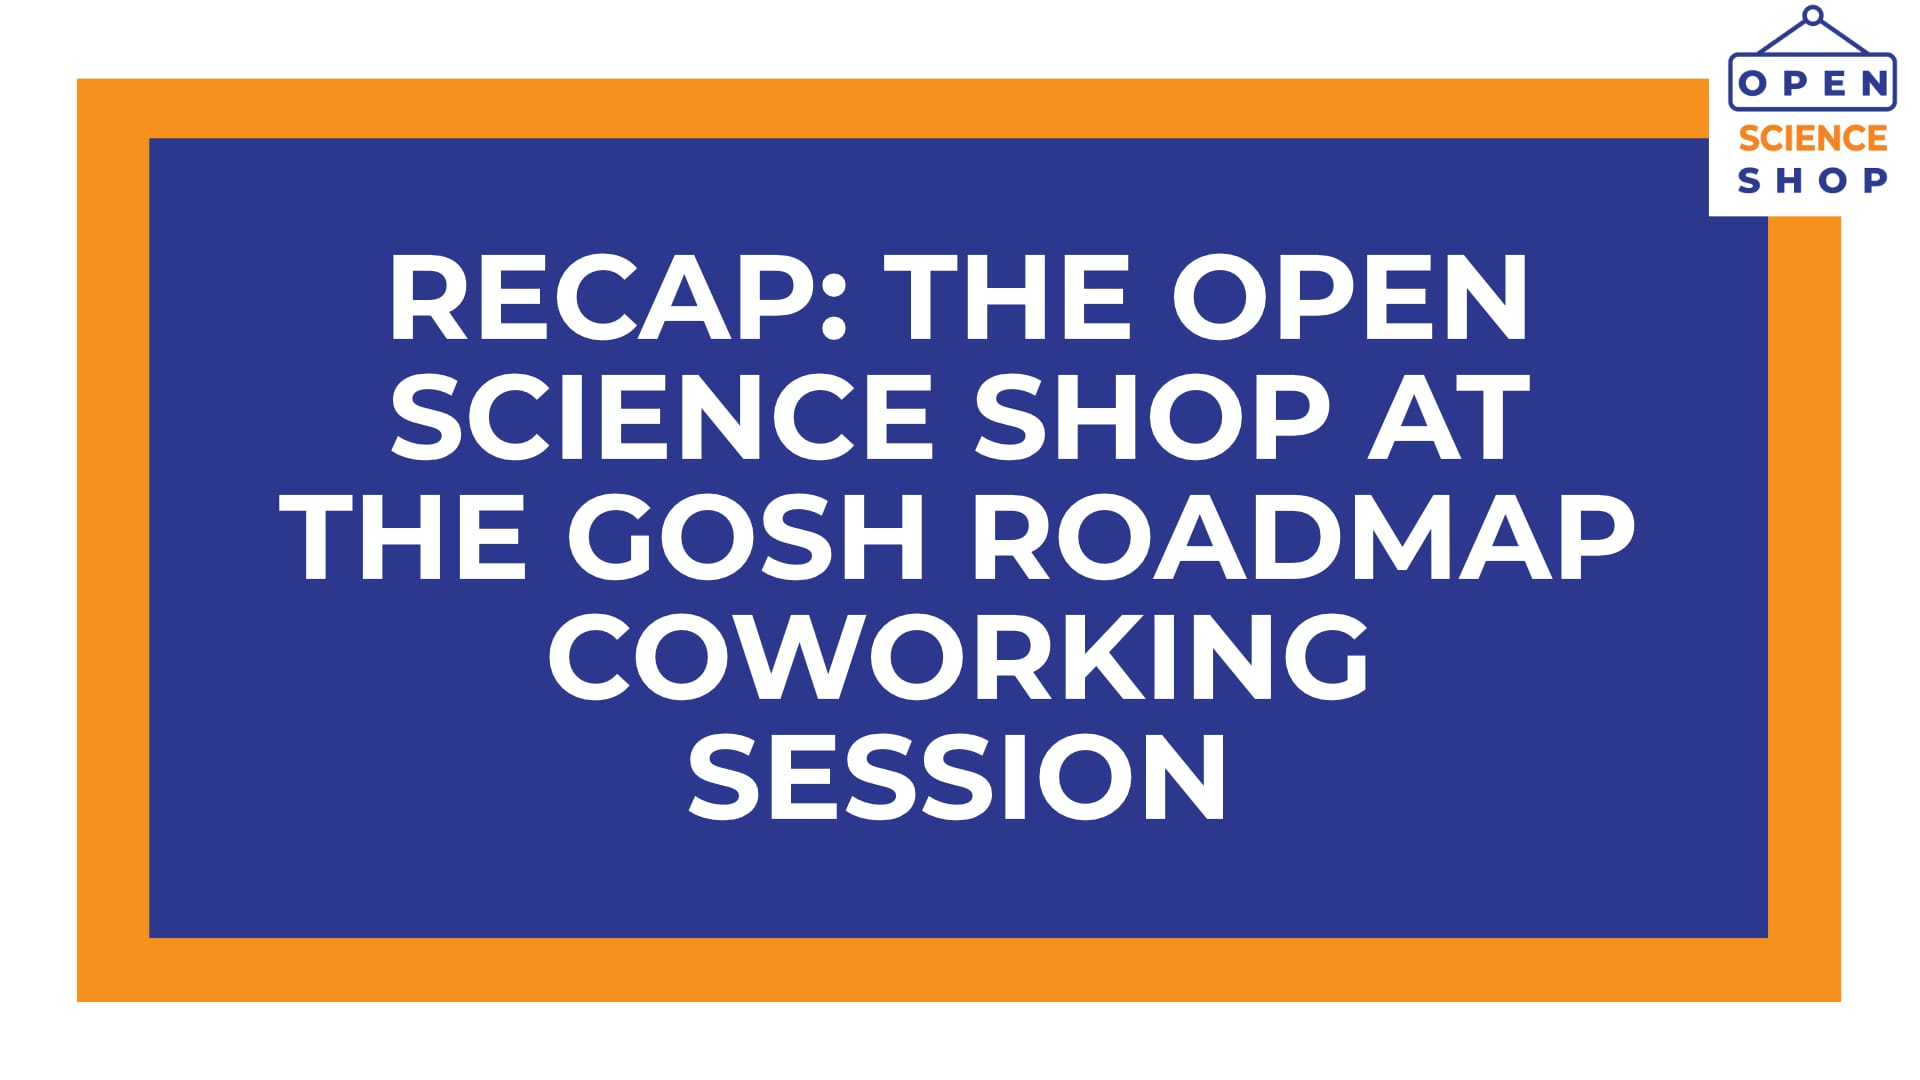 White text on blue and orange background reads "Recap: Open Science Shop at the GOSH Roadmap coworking session"